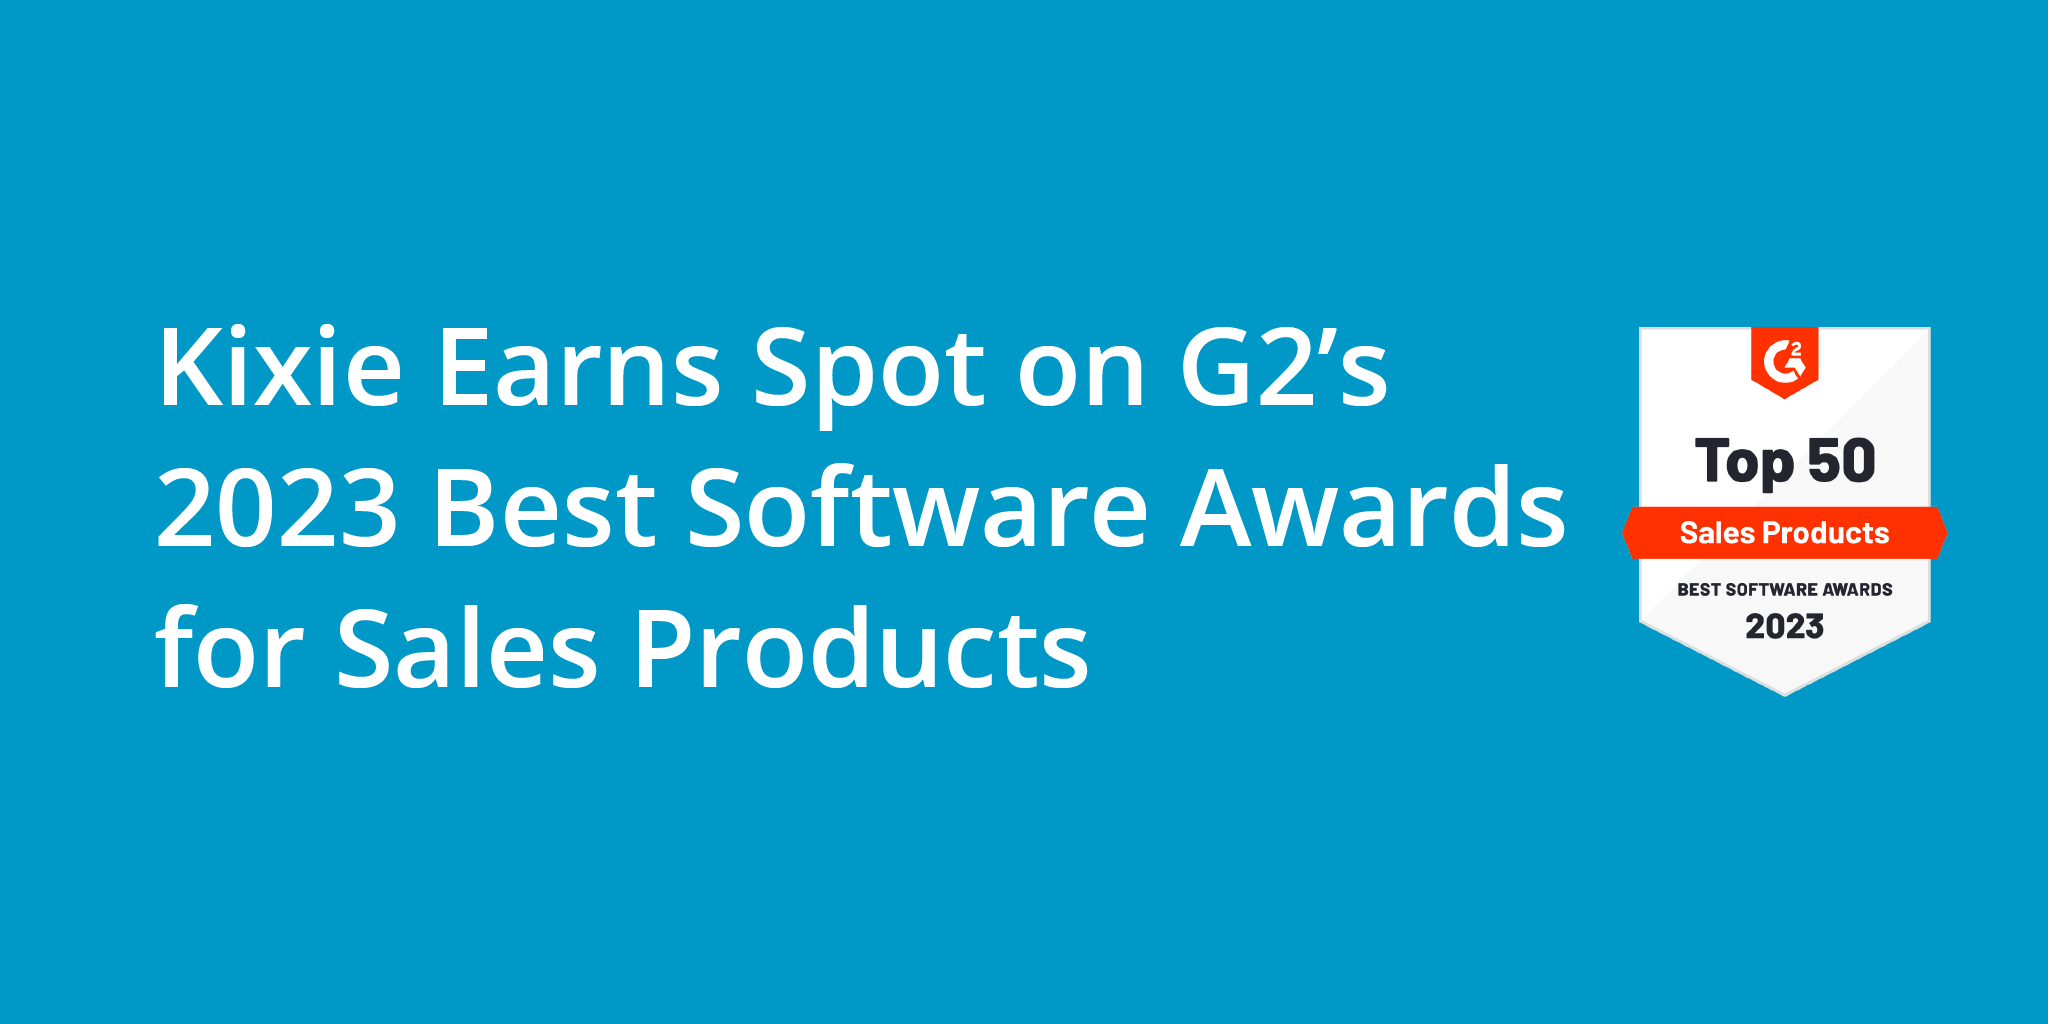 Kixie Earns Spot on G2’s 2023 Best Software Awards for Sales Products